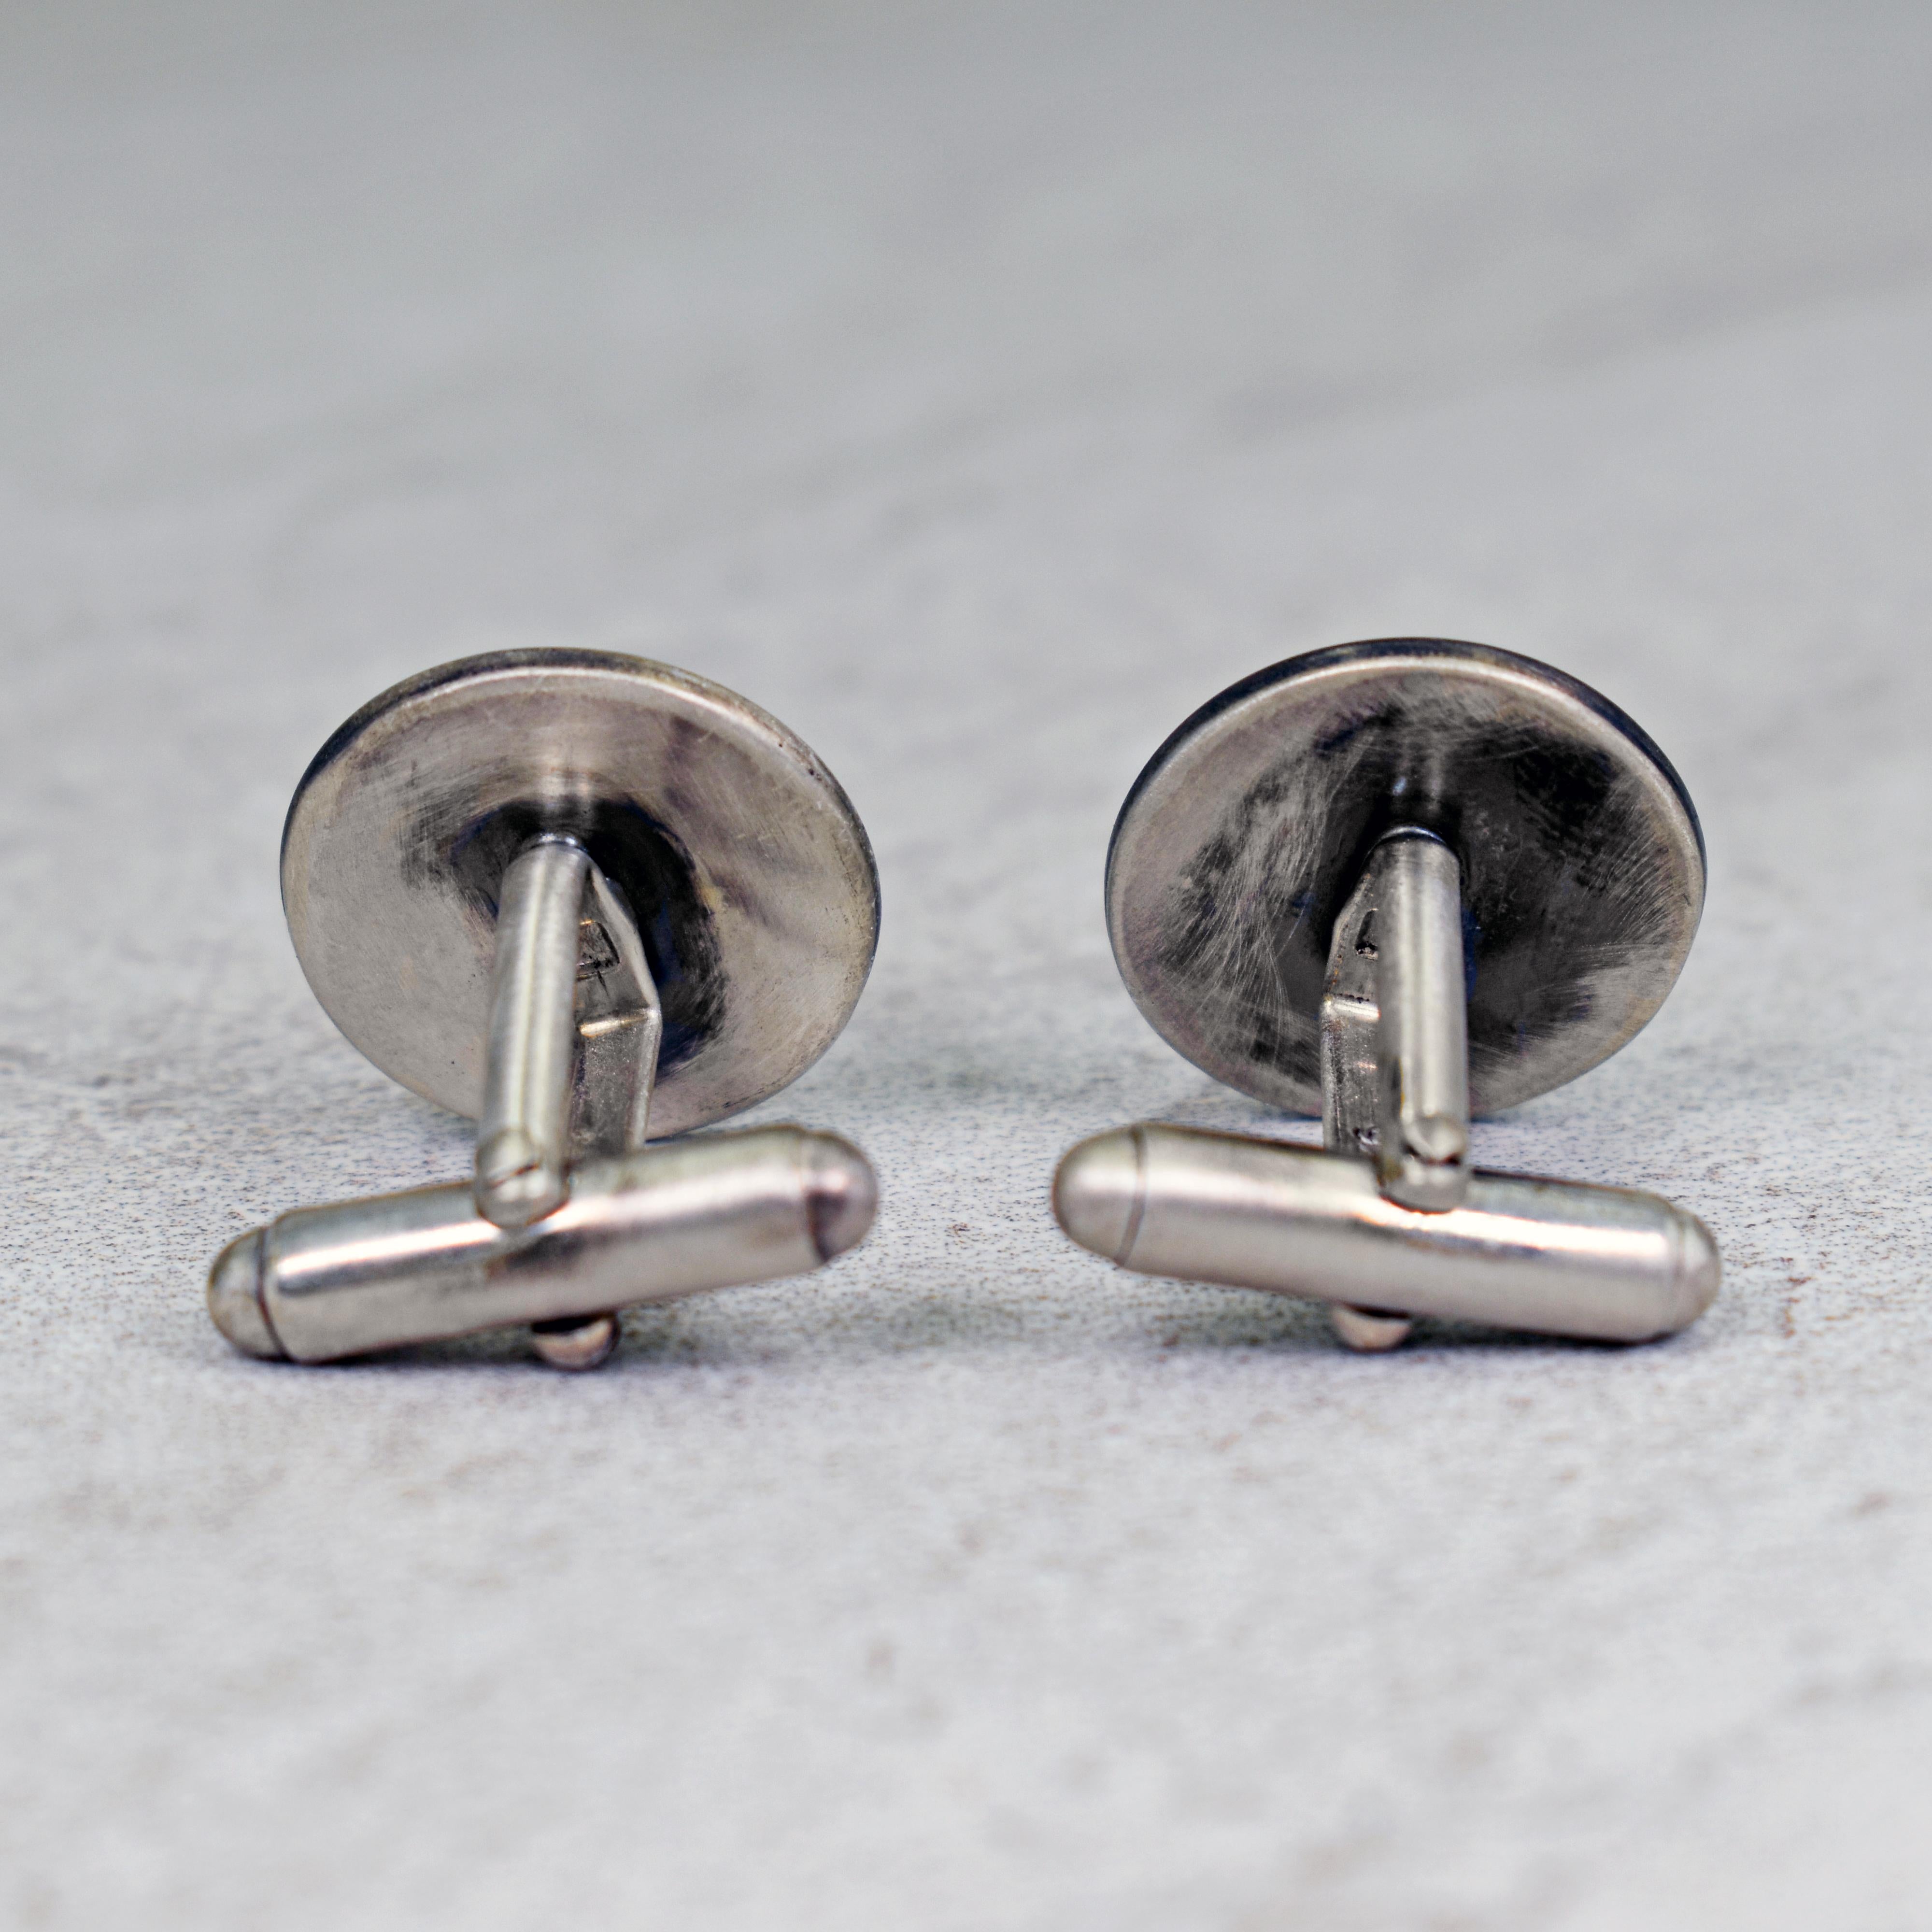 Contemporary Ancient Roman Bronze Coin Sterling Silver Cufflinks